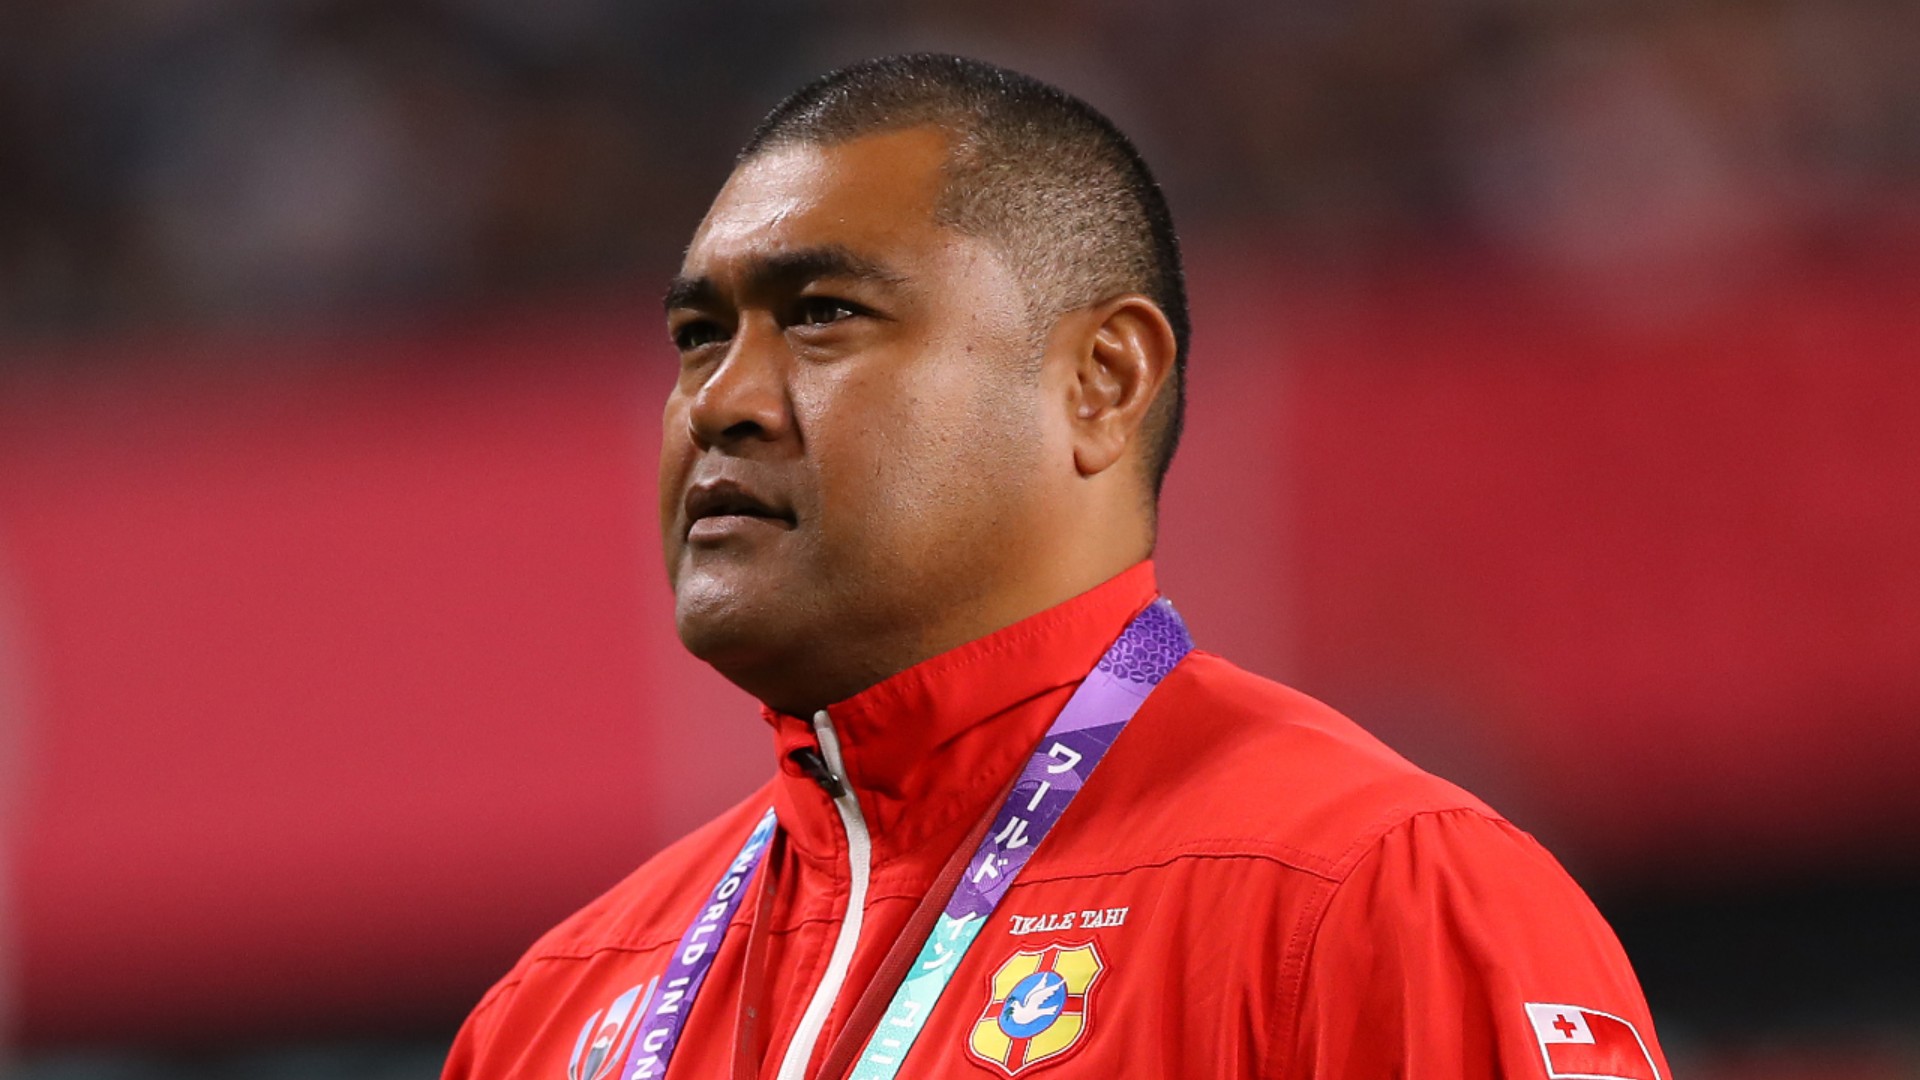 Tonga coach Toutai Kefu is in a serious condition in hospital after an attack at his home in Brisbane.